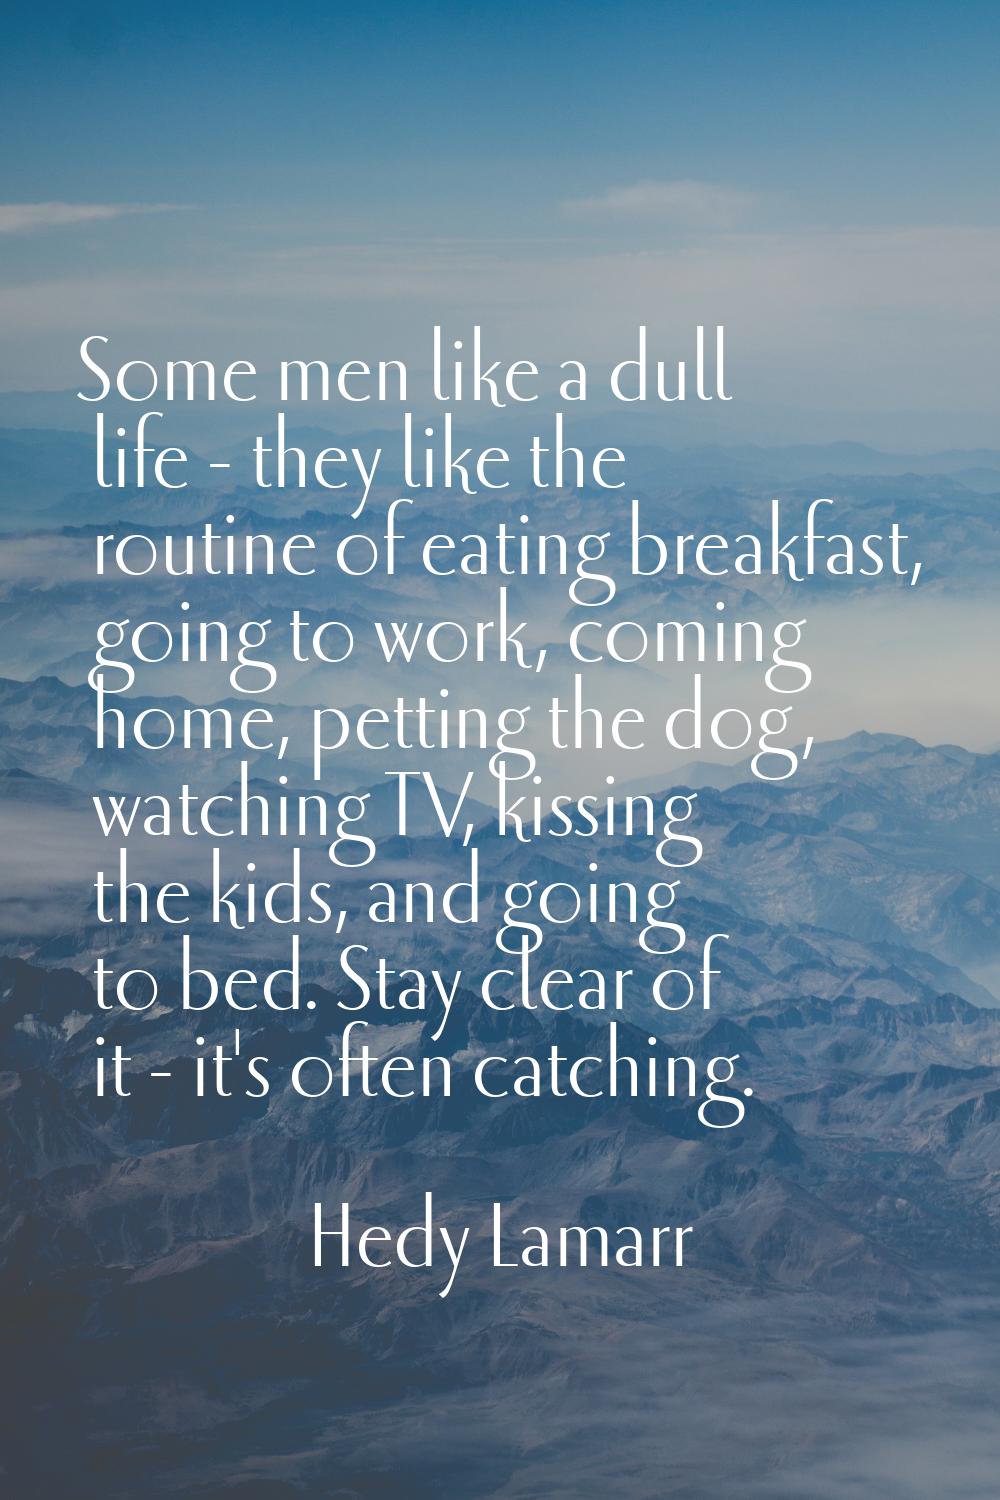 Some men like a dull life - they like the routine of eating breakfast, going to work, coming home, 